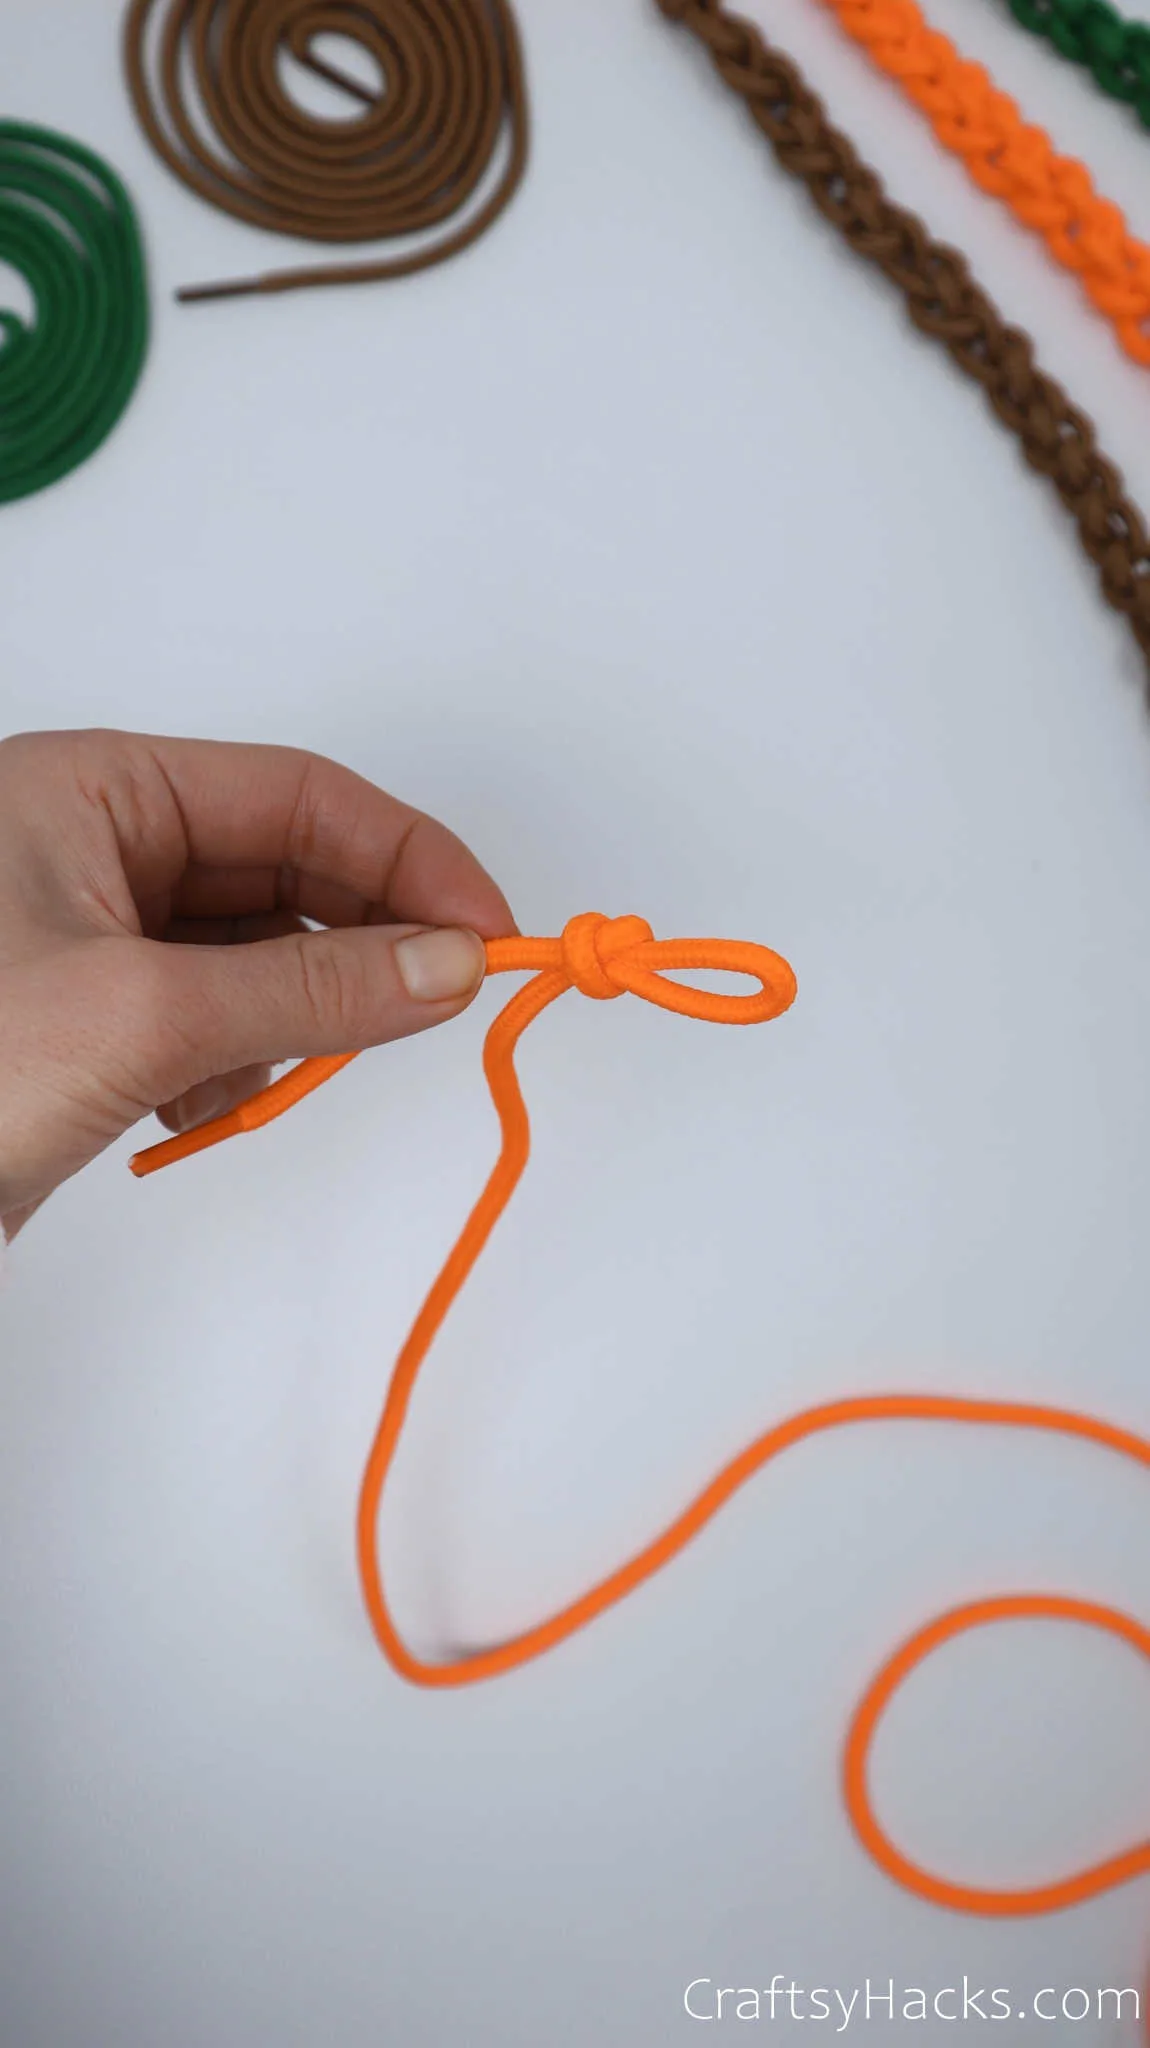 knot tied in shoelace